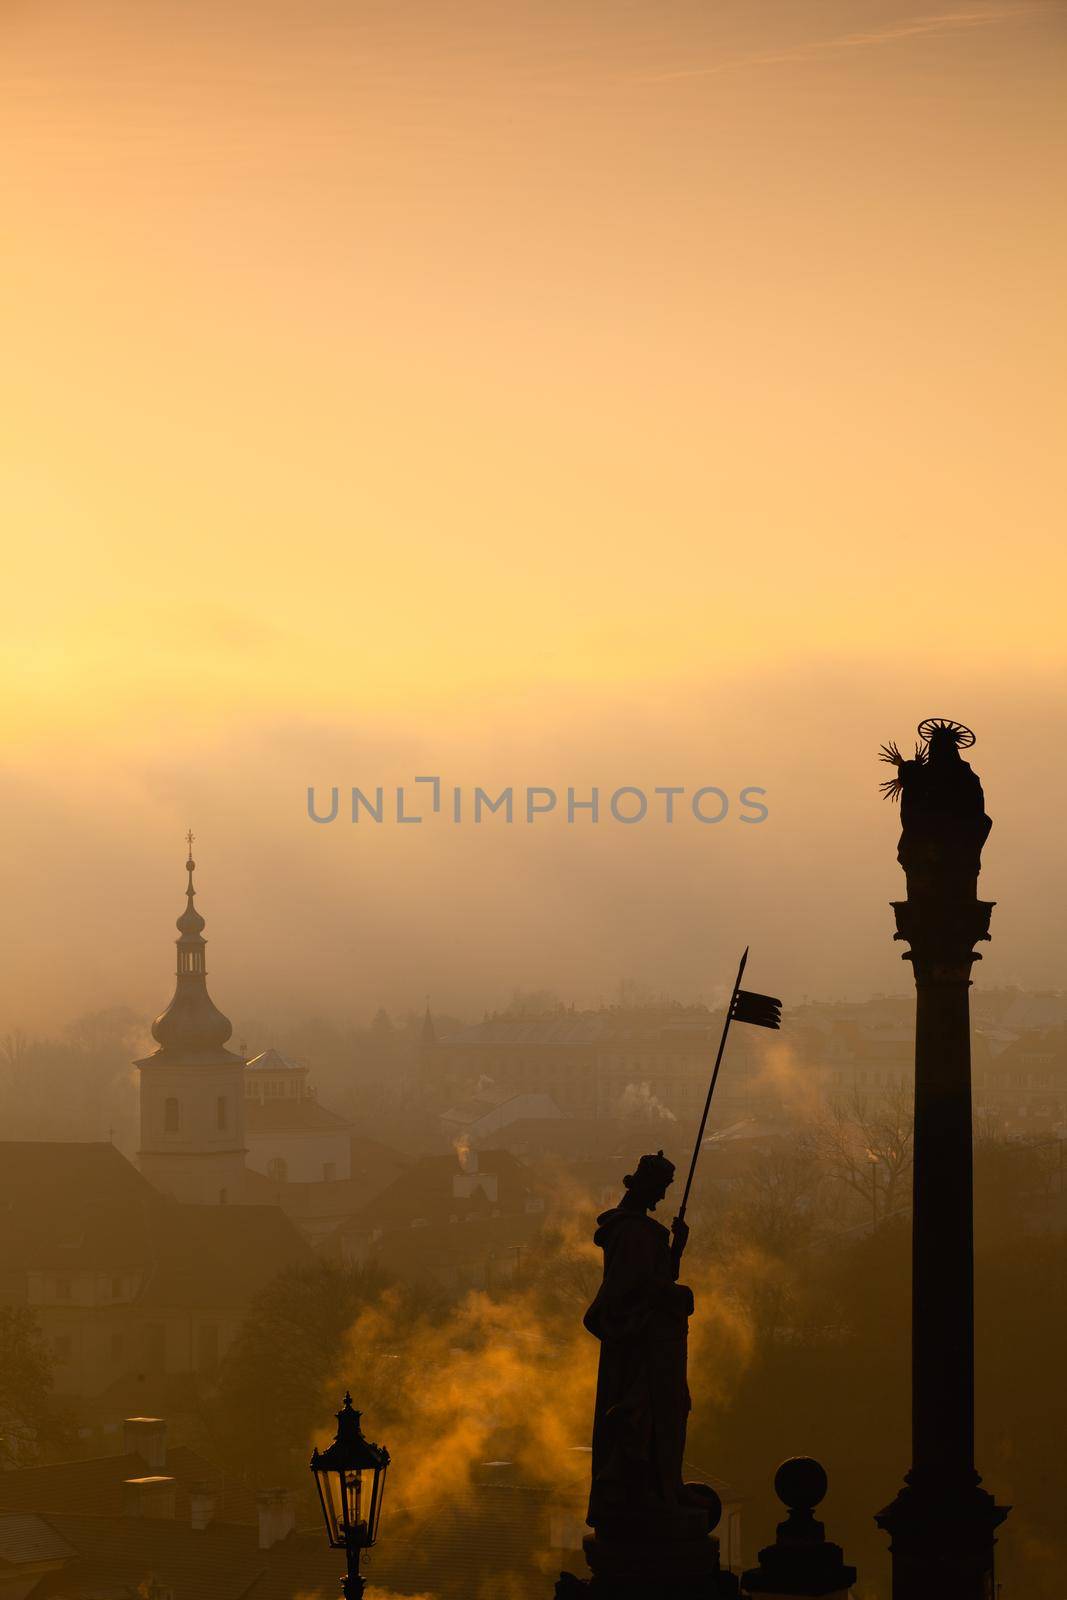 Sunrise over Lesser Town, Prague, Czech Republic. Lesser Town is a hillside area with views across the Vltava river to the old town. by CaptureLight